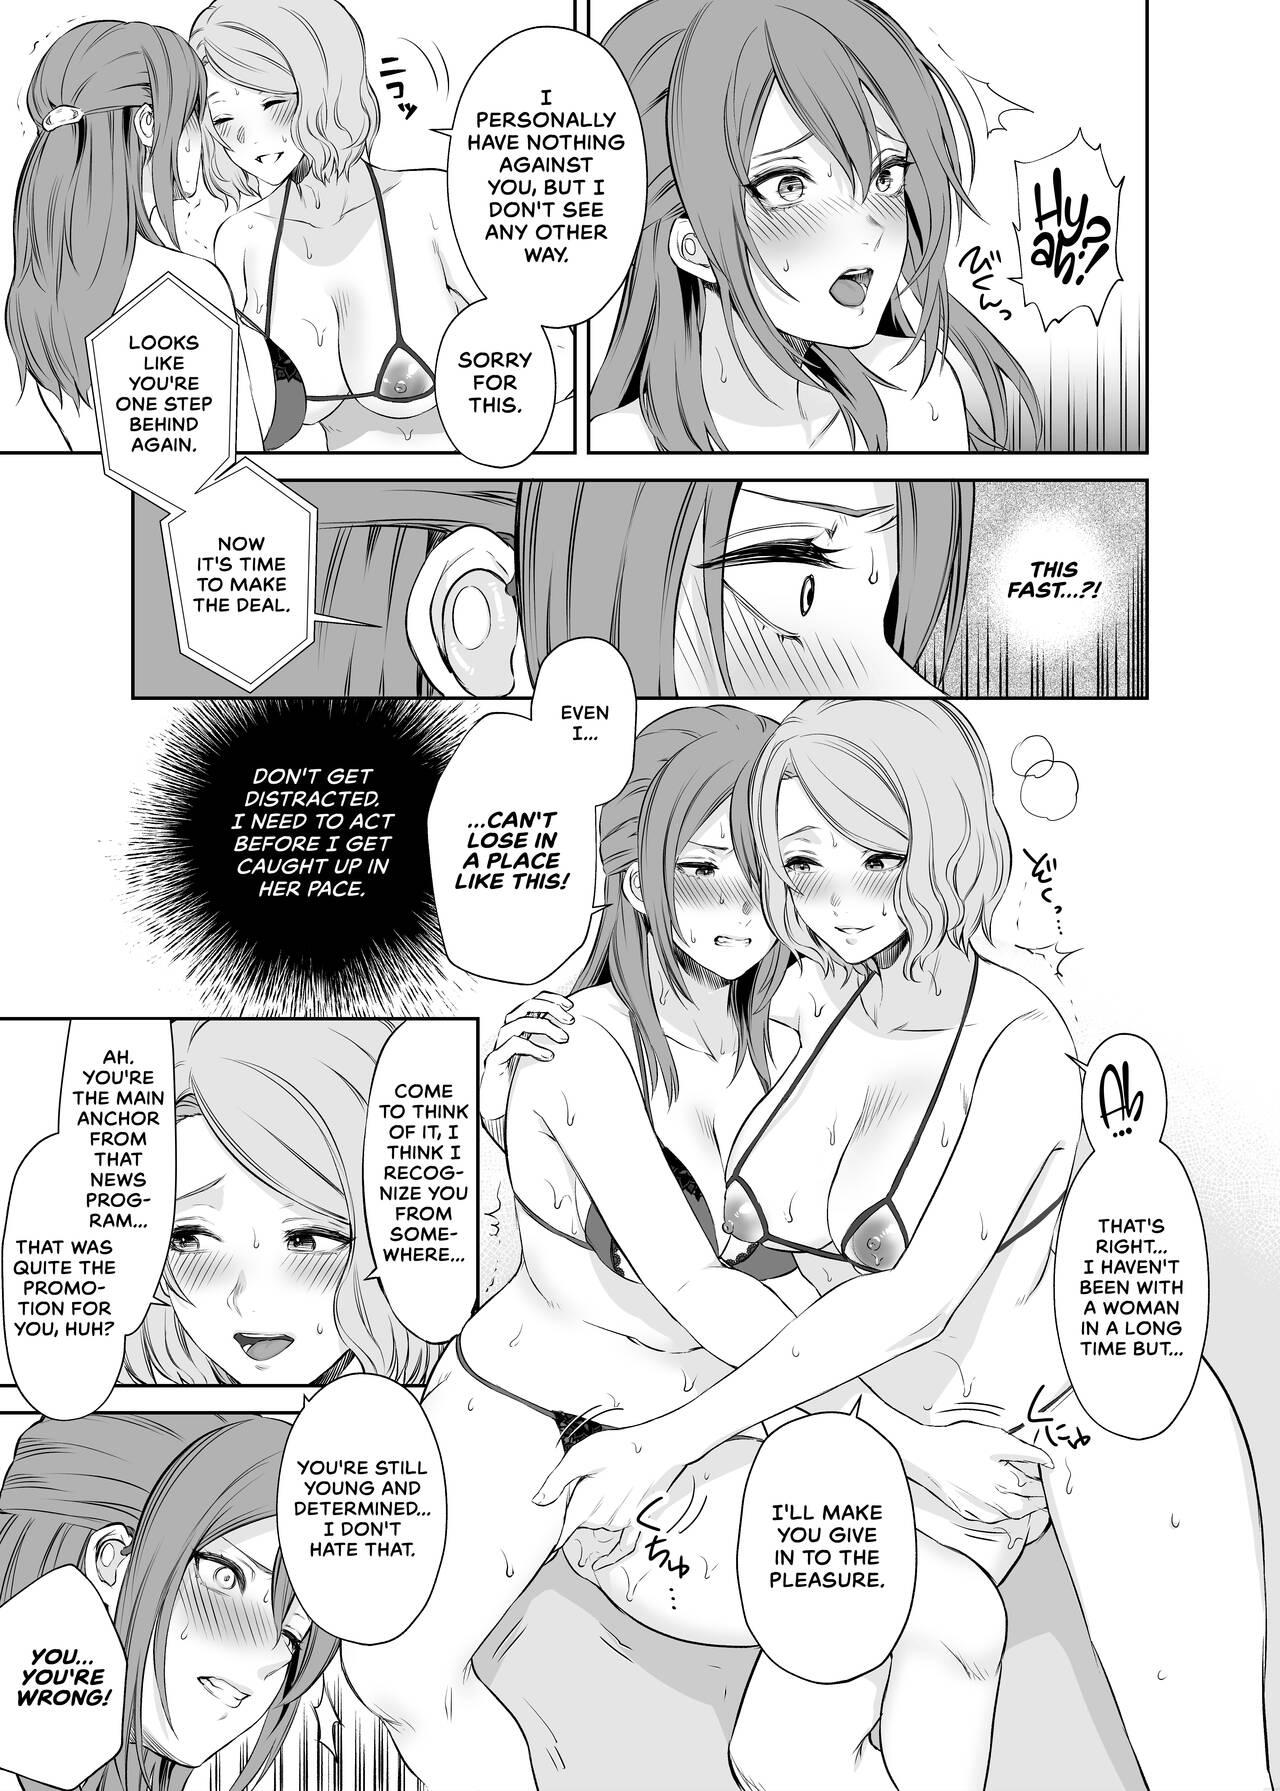 Monster Dick [Remora Works (Meriko)] LesFes Co -Candid Reporting- Vol. 003 [English] - Original Africa - Page 8